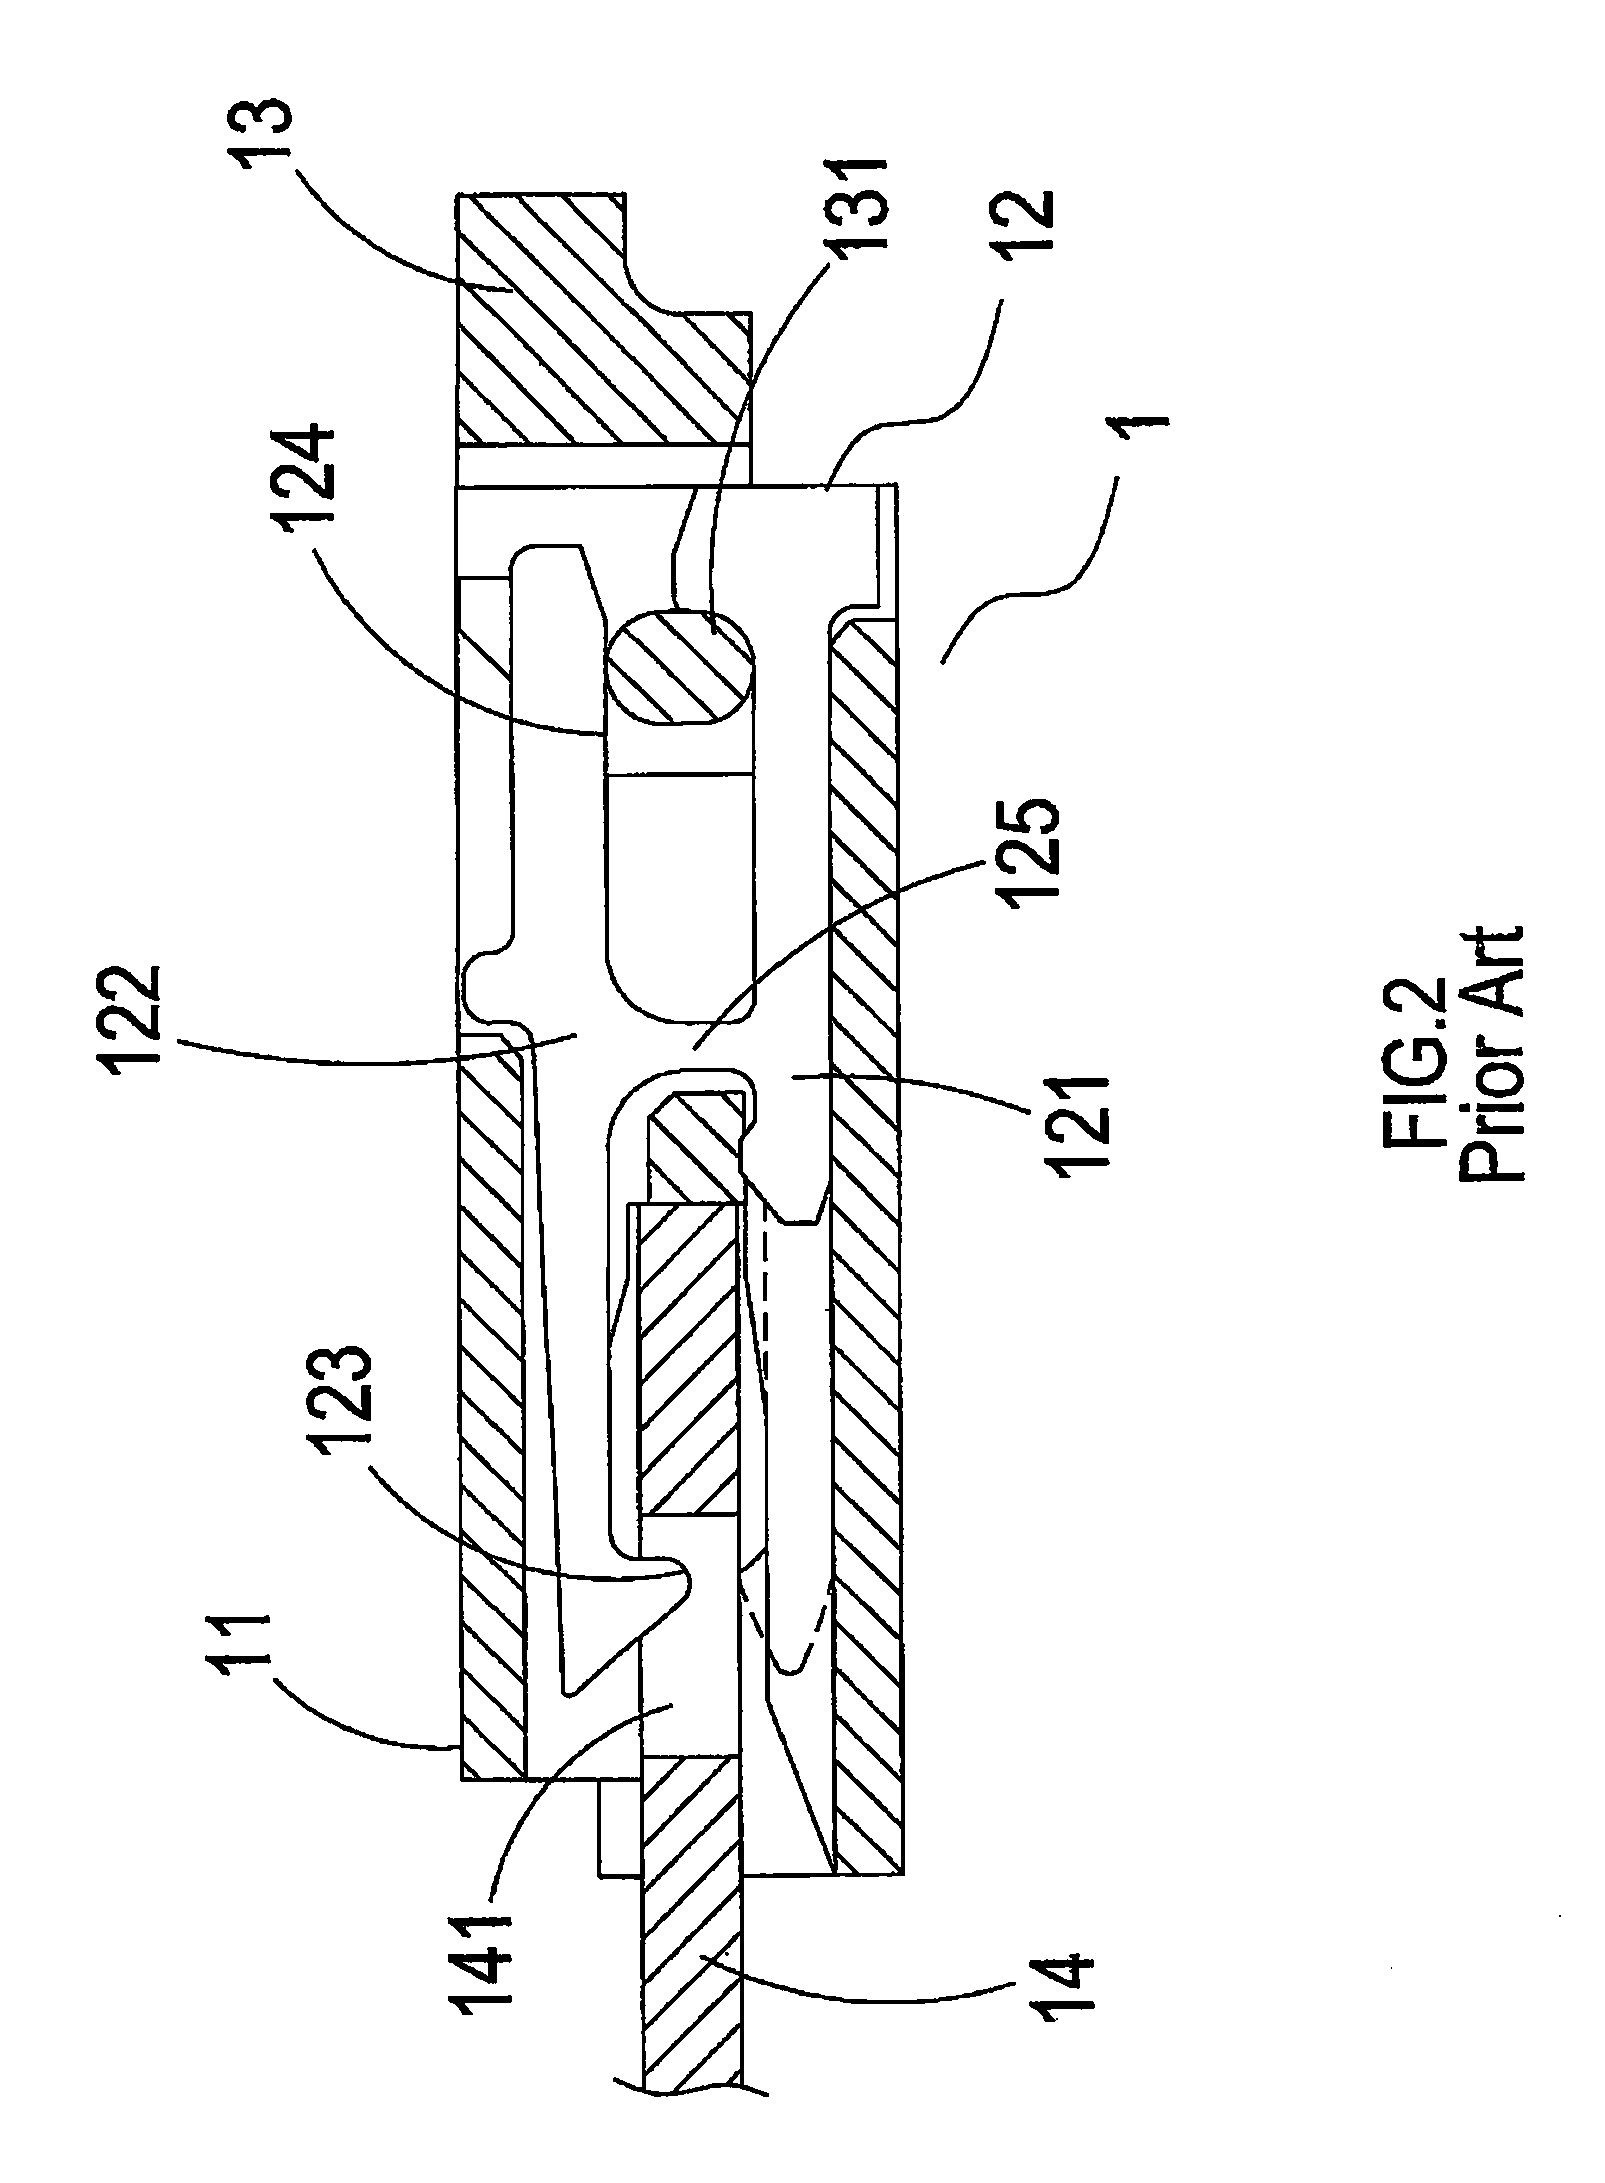 Connector for sturdily connecting flexible circuit boards